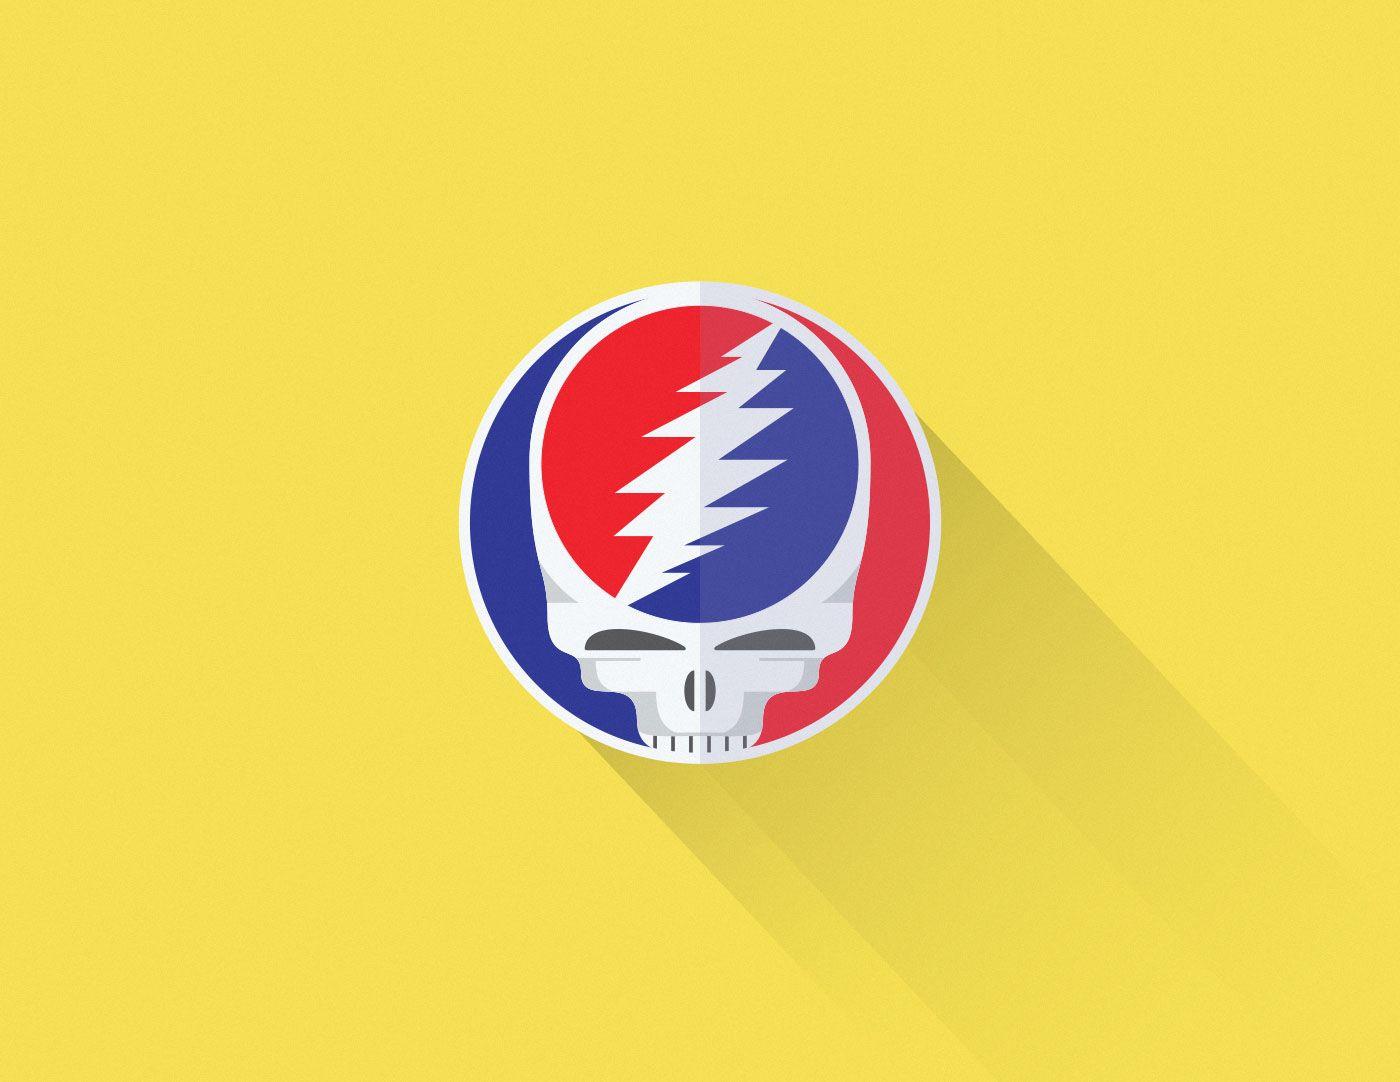 Steal Your Face Logo - Material Design Steal Your Face Logo on Behance